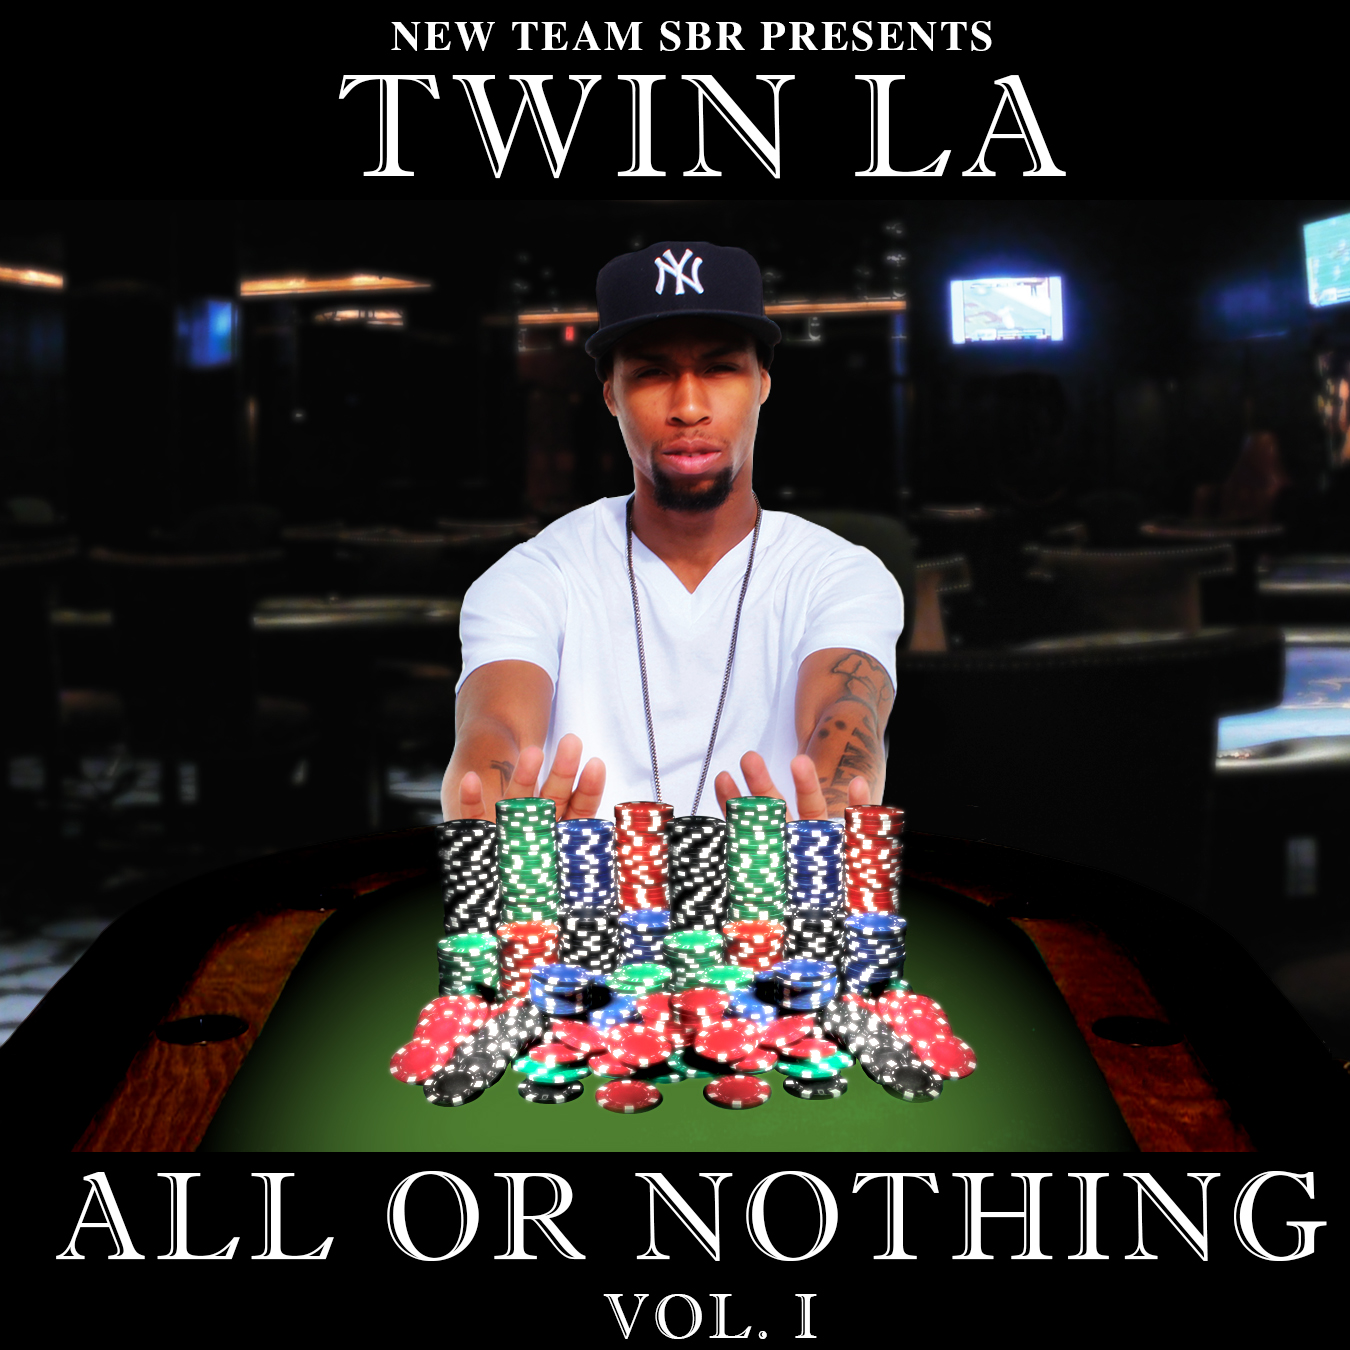 Video: Twin L.A. - Relentlessly Featuring Queen T